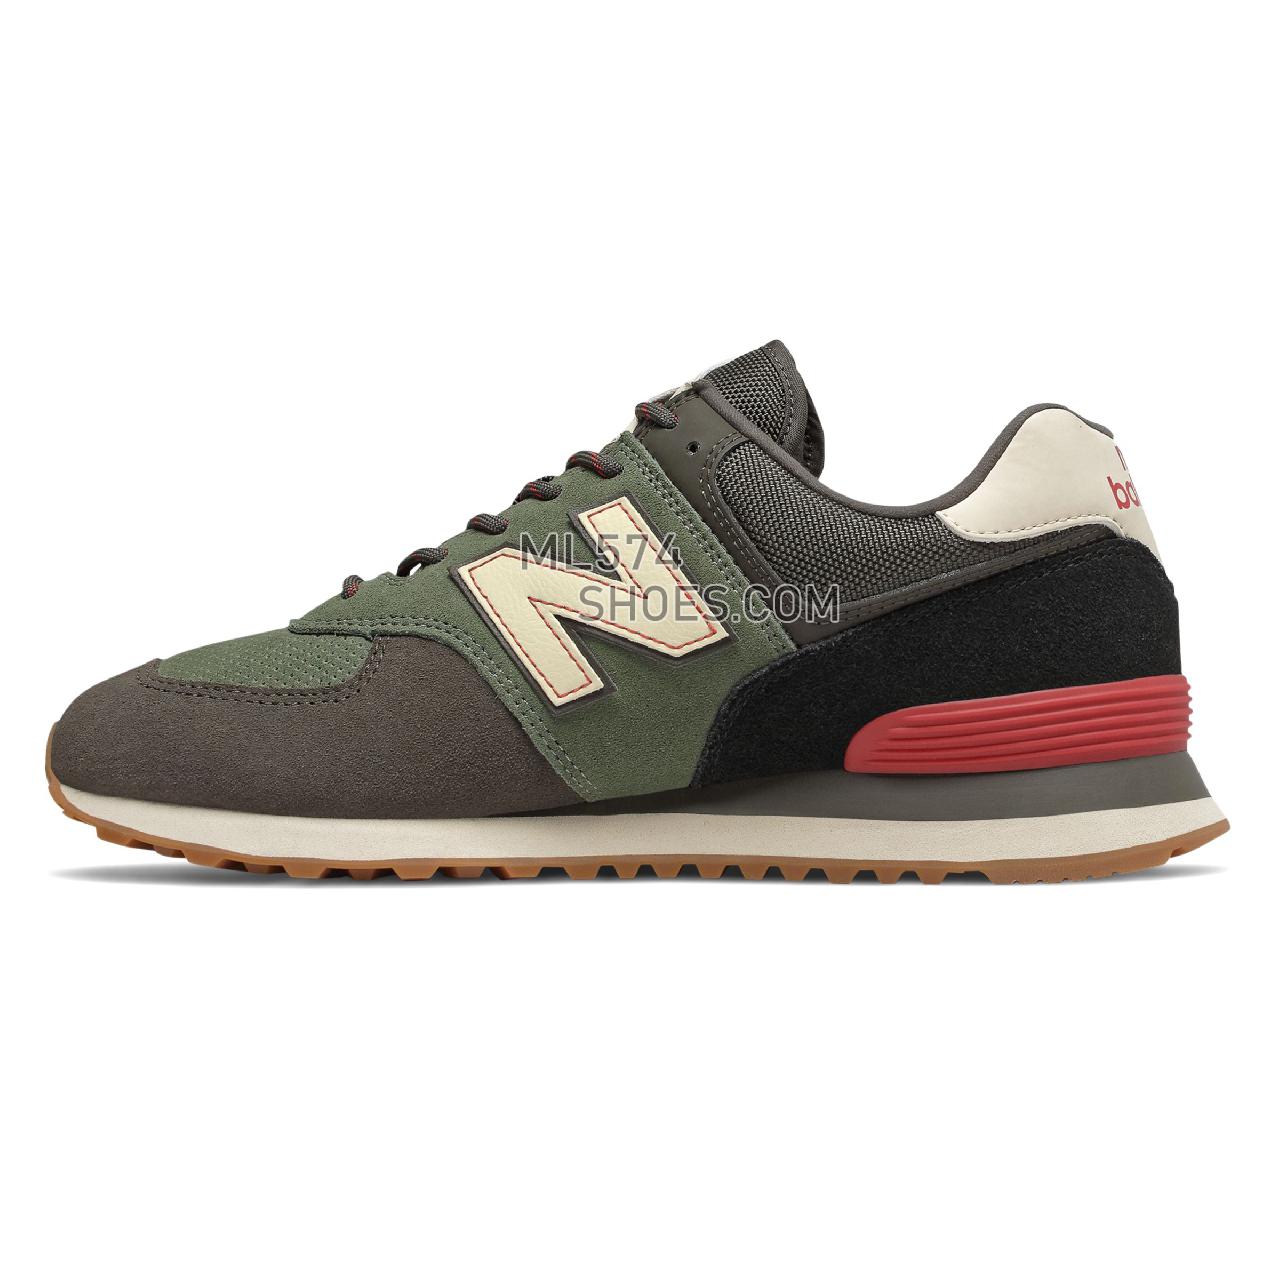 New Balance 574 - Men's Classic Sneakers - Camo Green with Team Red - ML574JHR